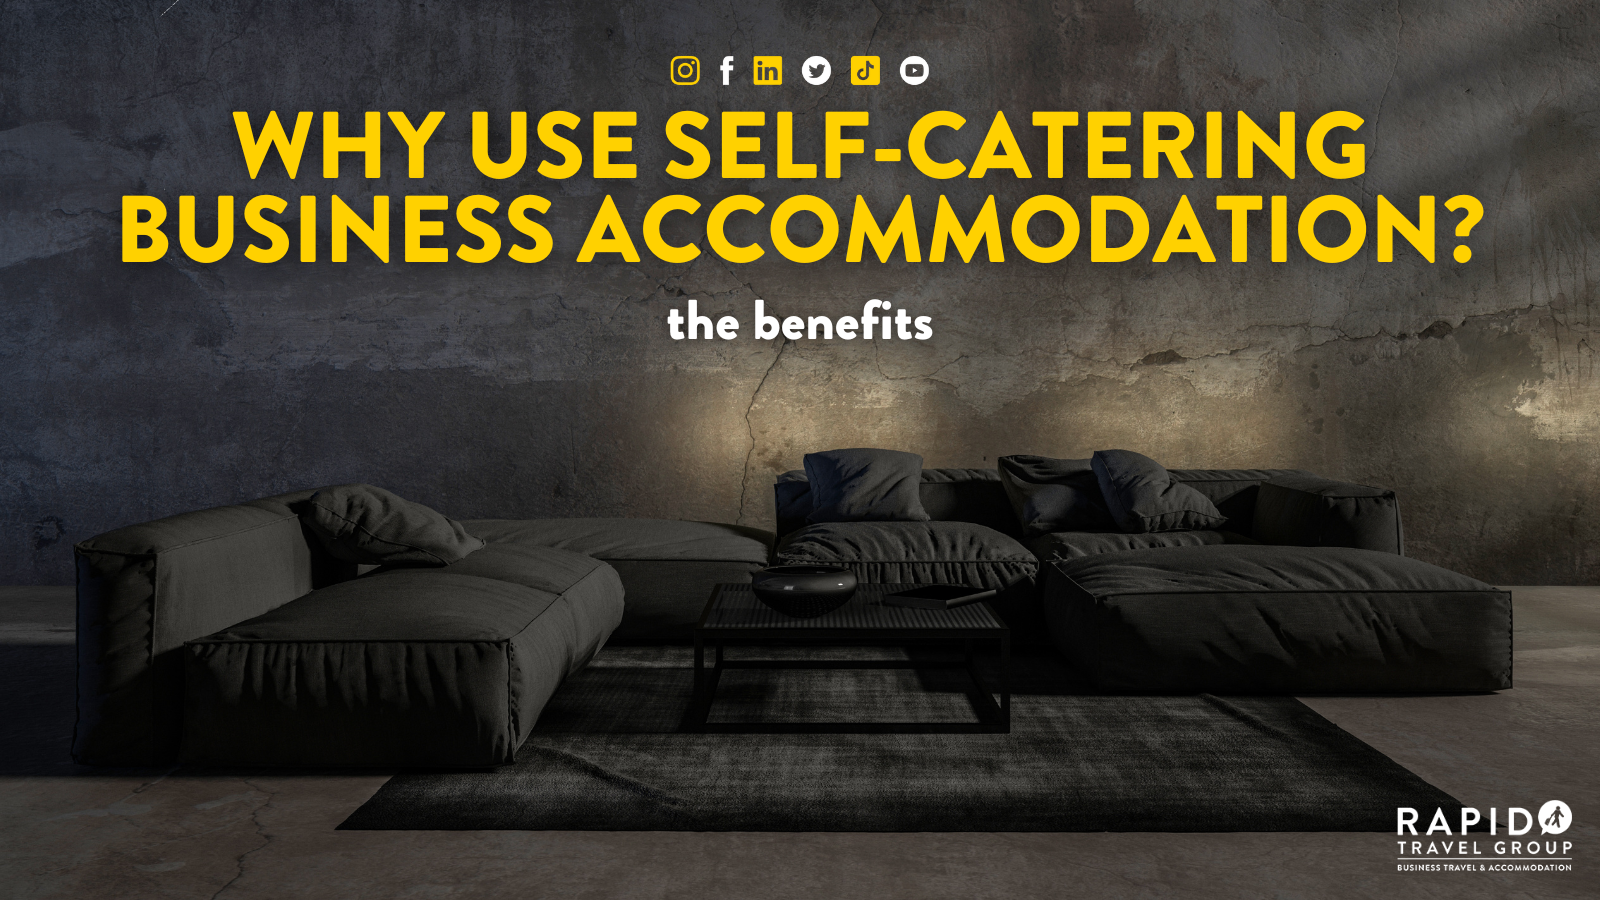 why use self-catering business accommodation? the benefits